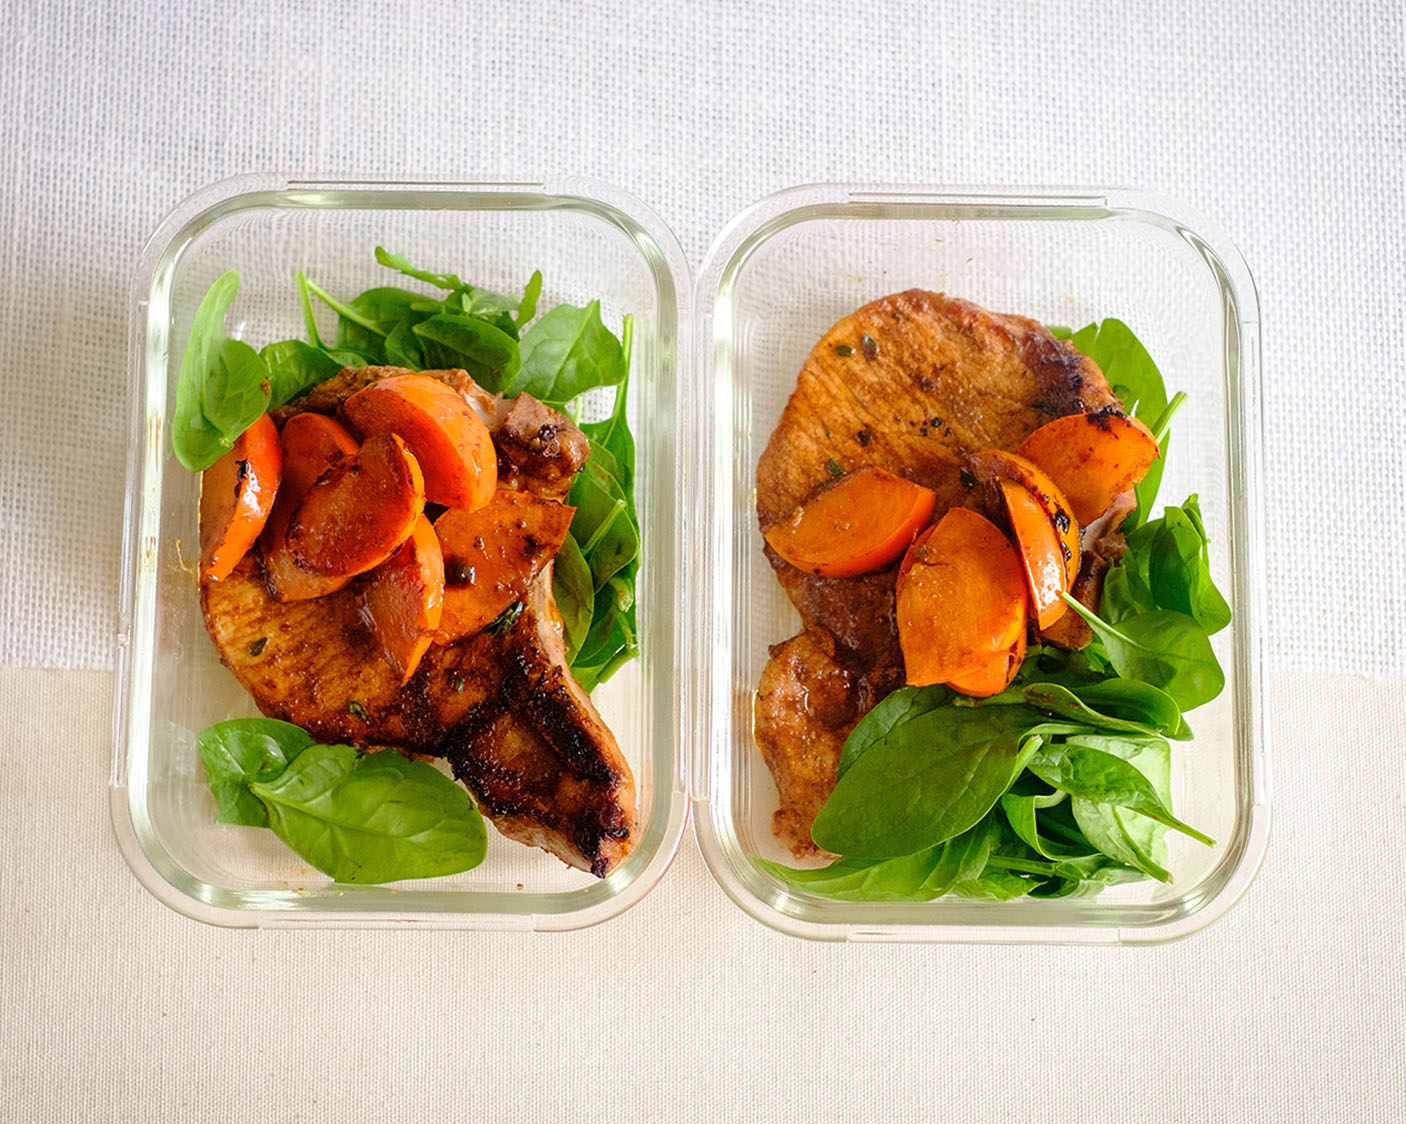 Best Meal Prepping Containers - PrepYoSelf